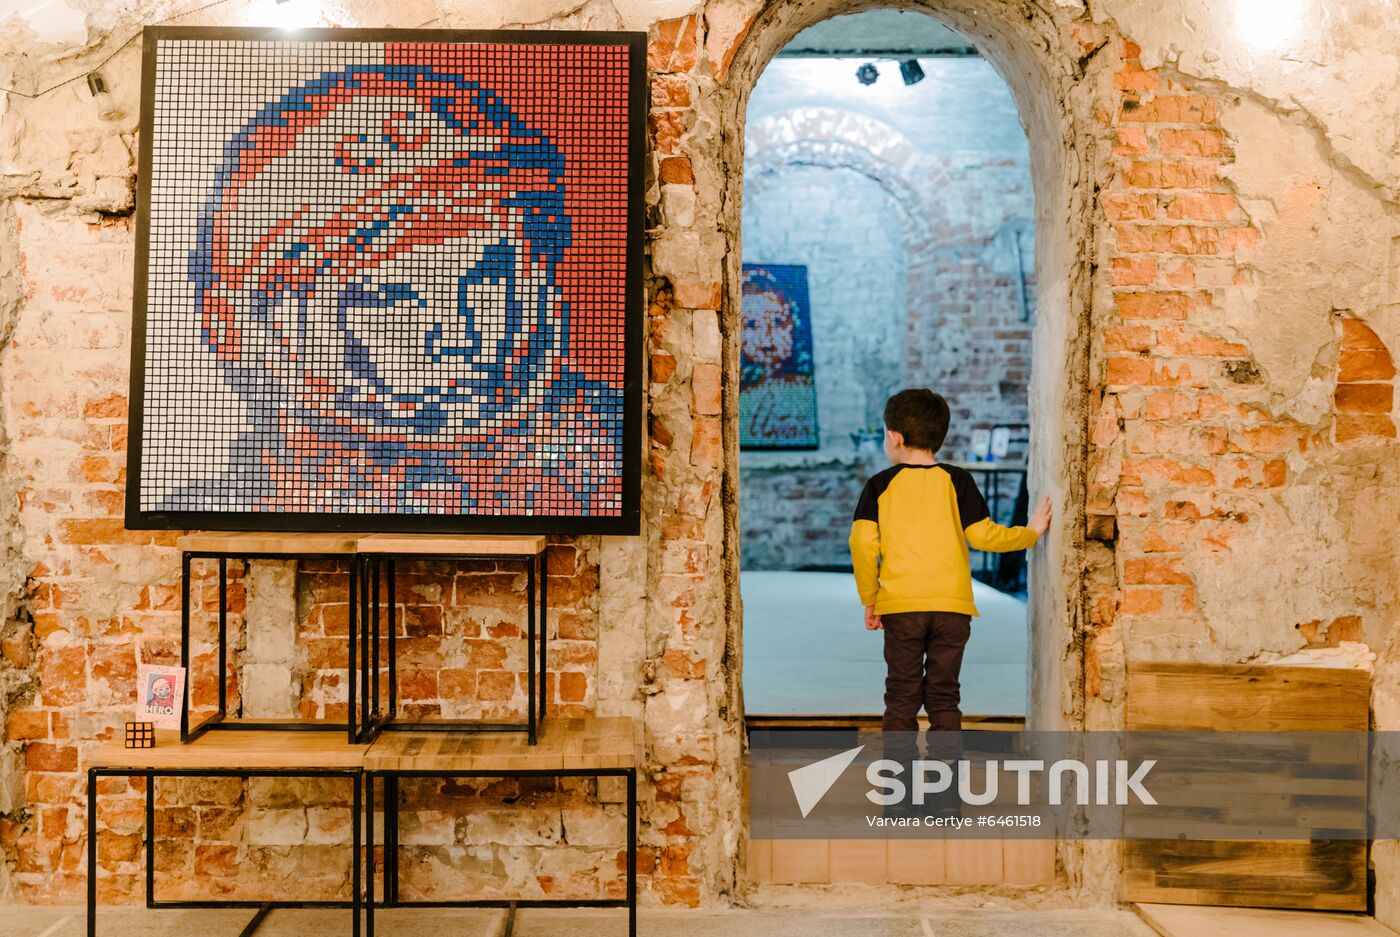 Russia Rubik's Cube Pictures Exhibition